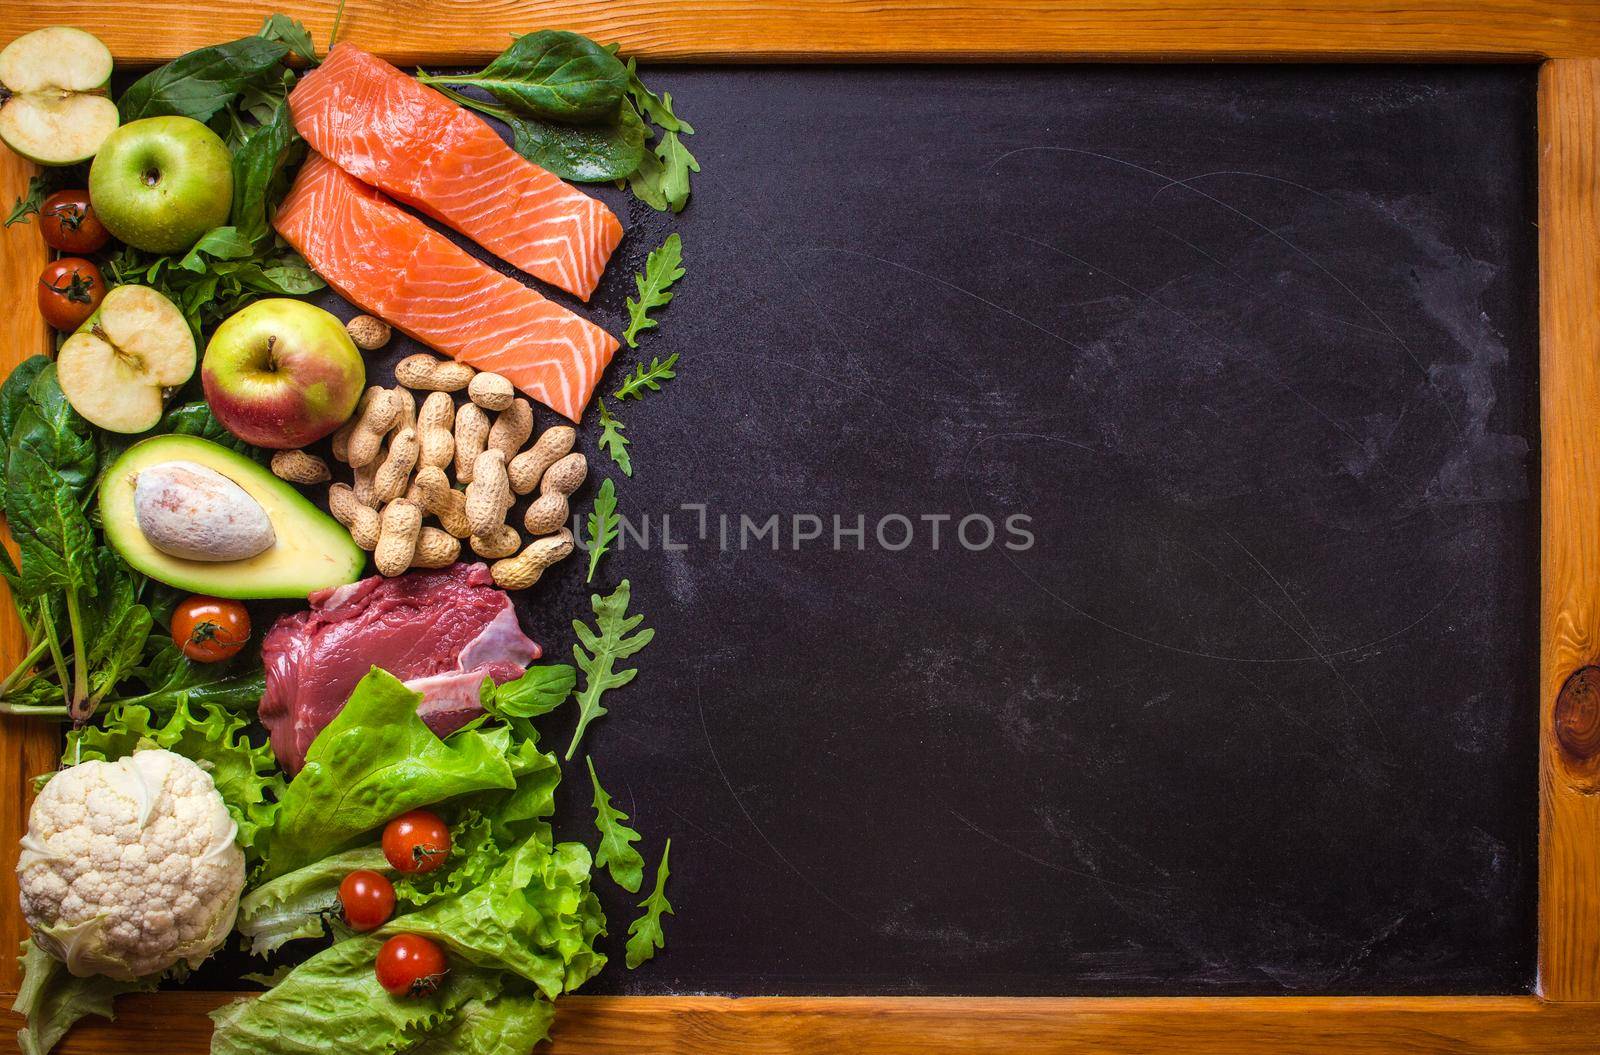 Fresh vegetables, fruits, fish, meat, nuts on black chalk board background. Сauliflower, avocado, apples, tomatoes, salmon, beef, spinach, herbs. Diet/healthy/paleo food. Ingredients. Space for text